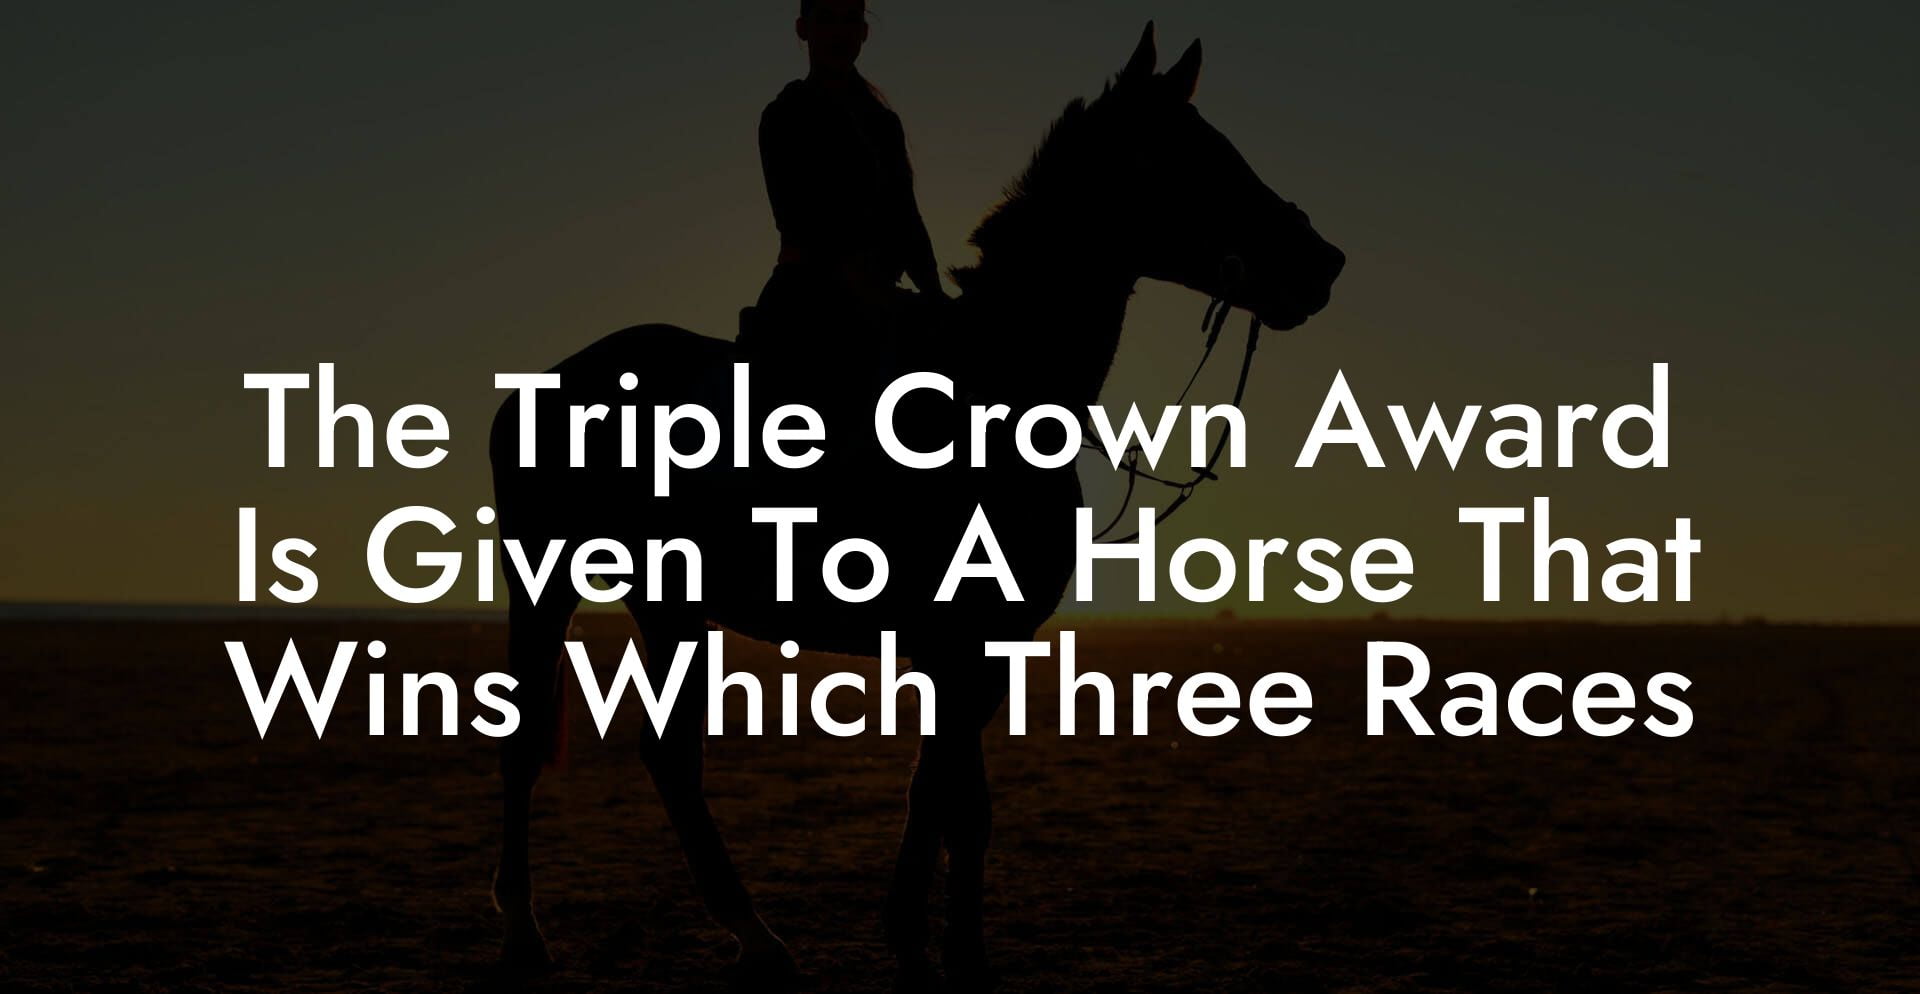 The Triple Crown Award Is Given To A Horse That Wins Which Three Races